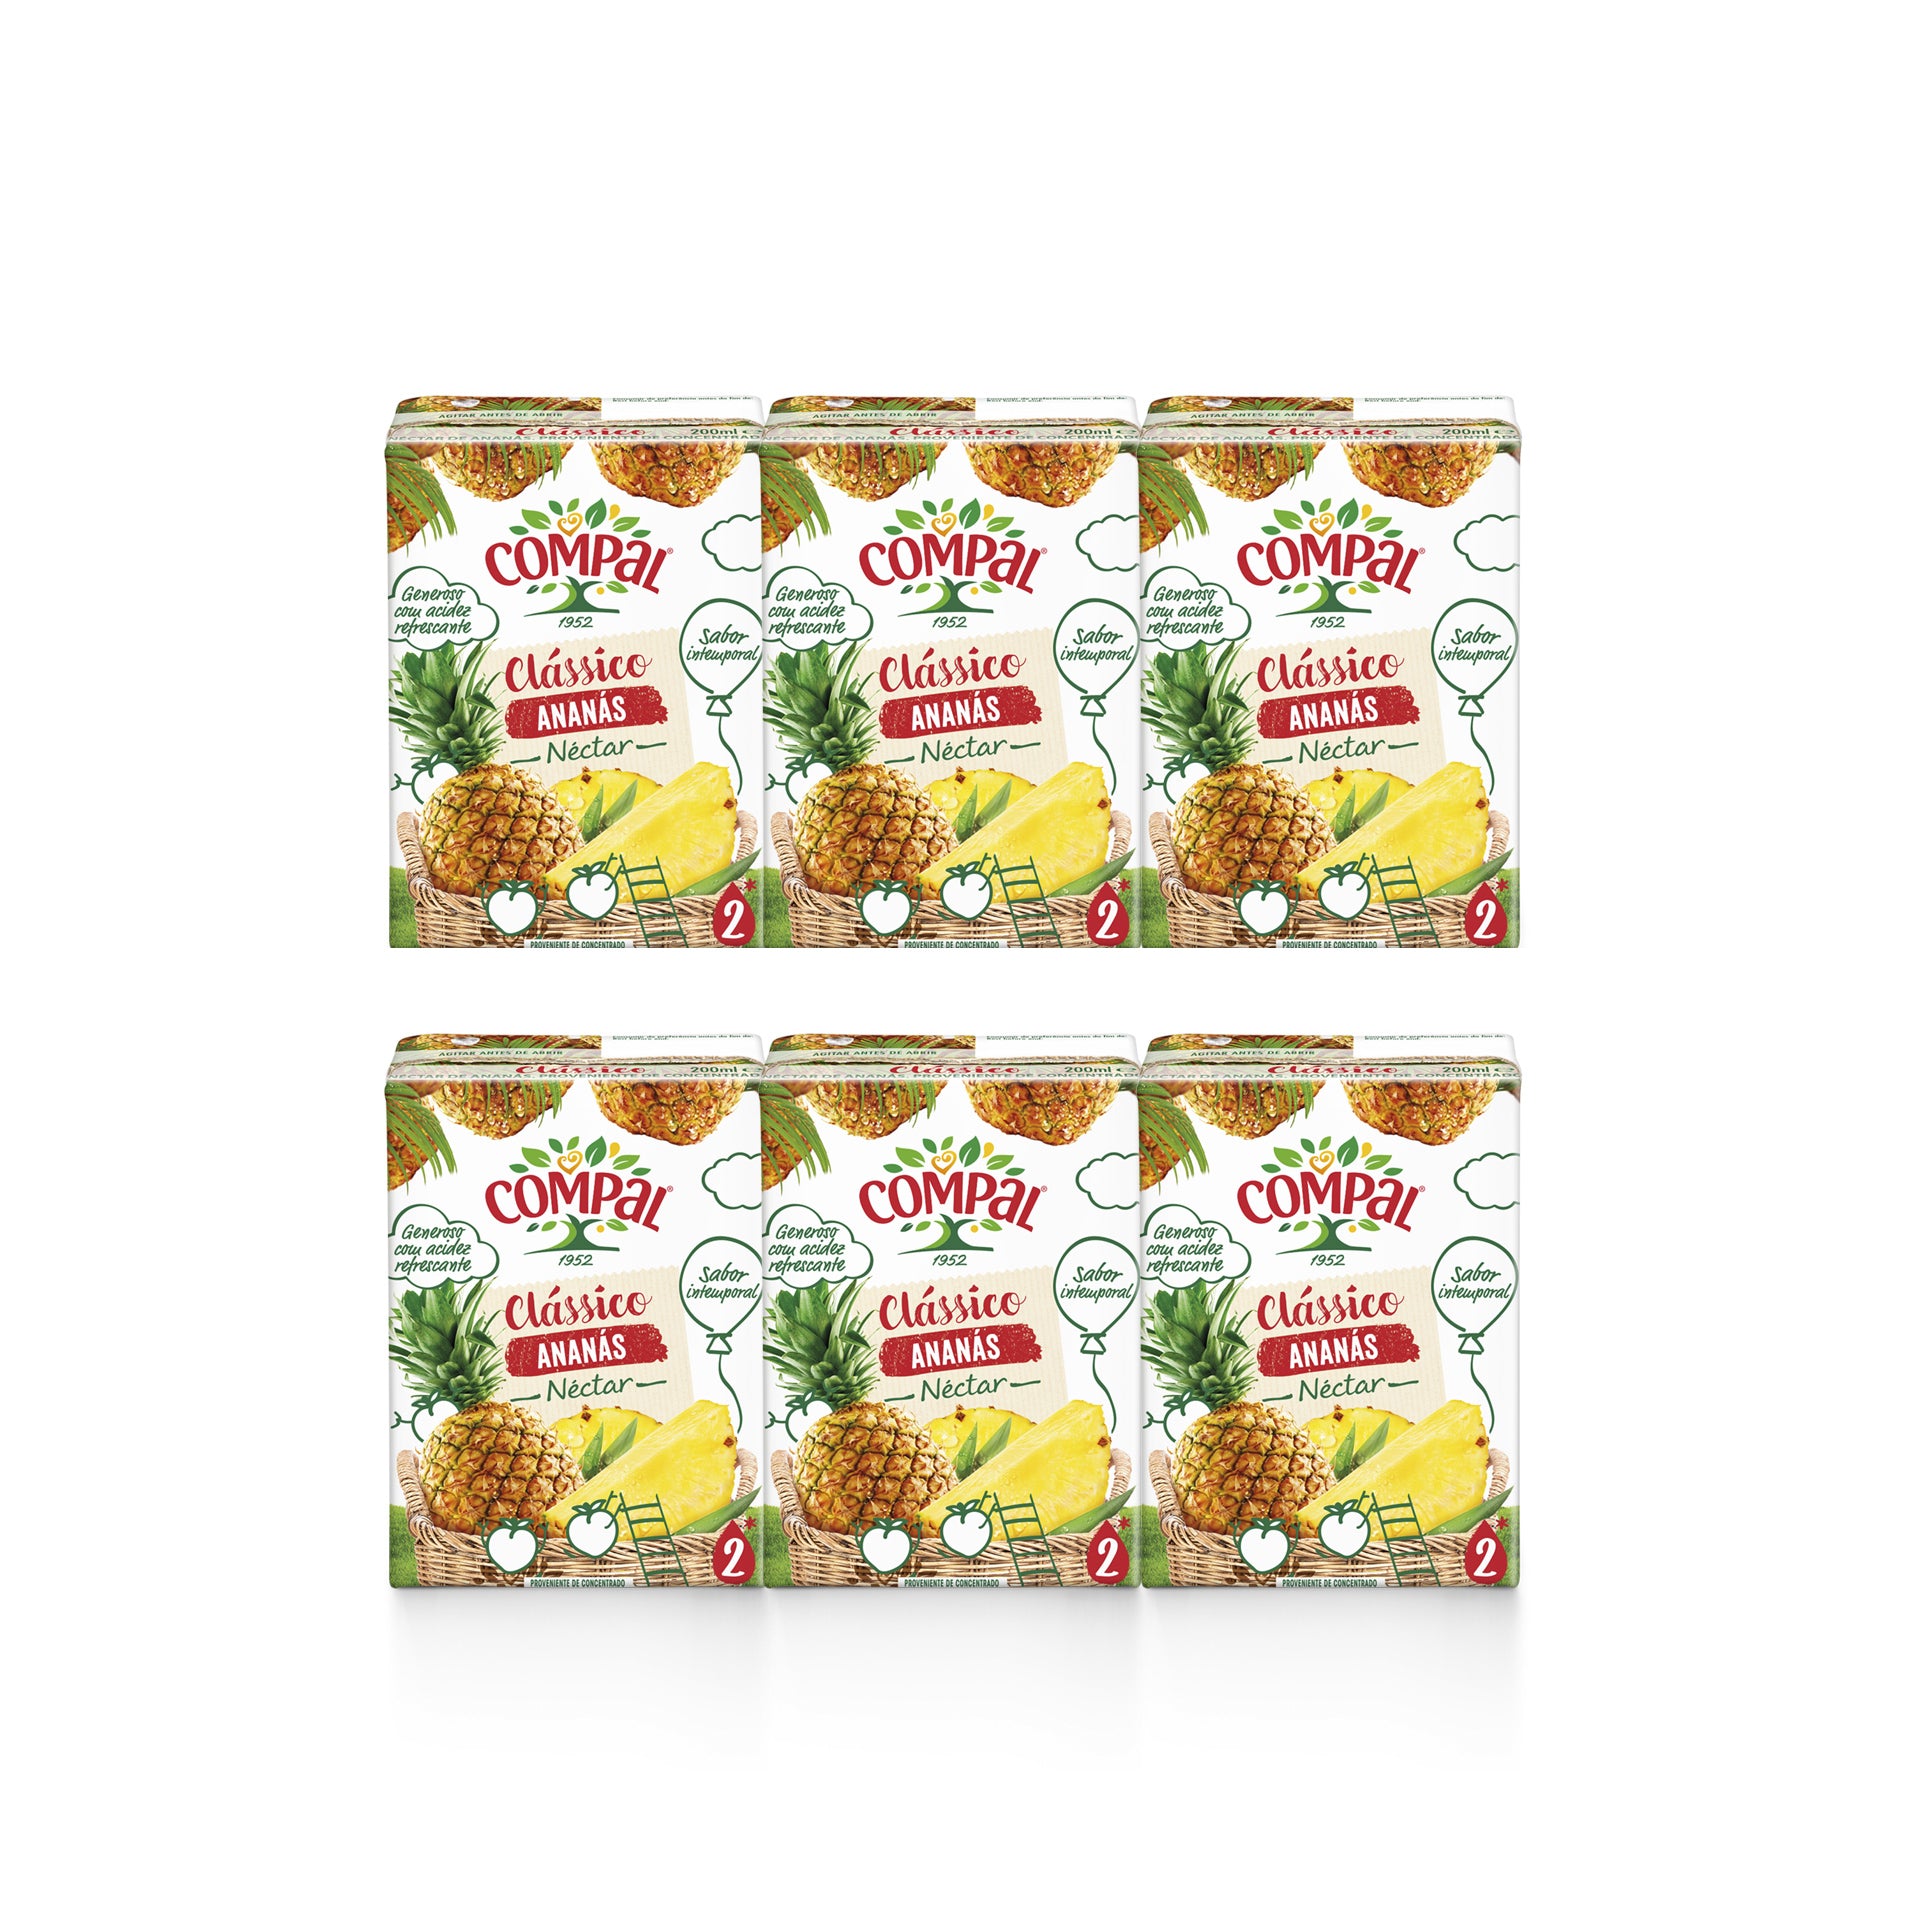 Compal Tetra Classic Ananas 3 x 20 cl - Pack 2 x 60 cl